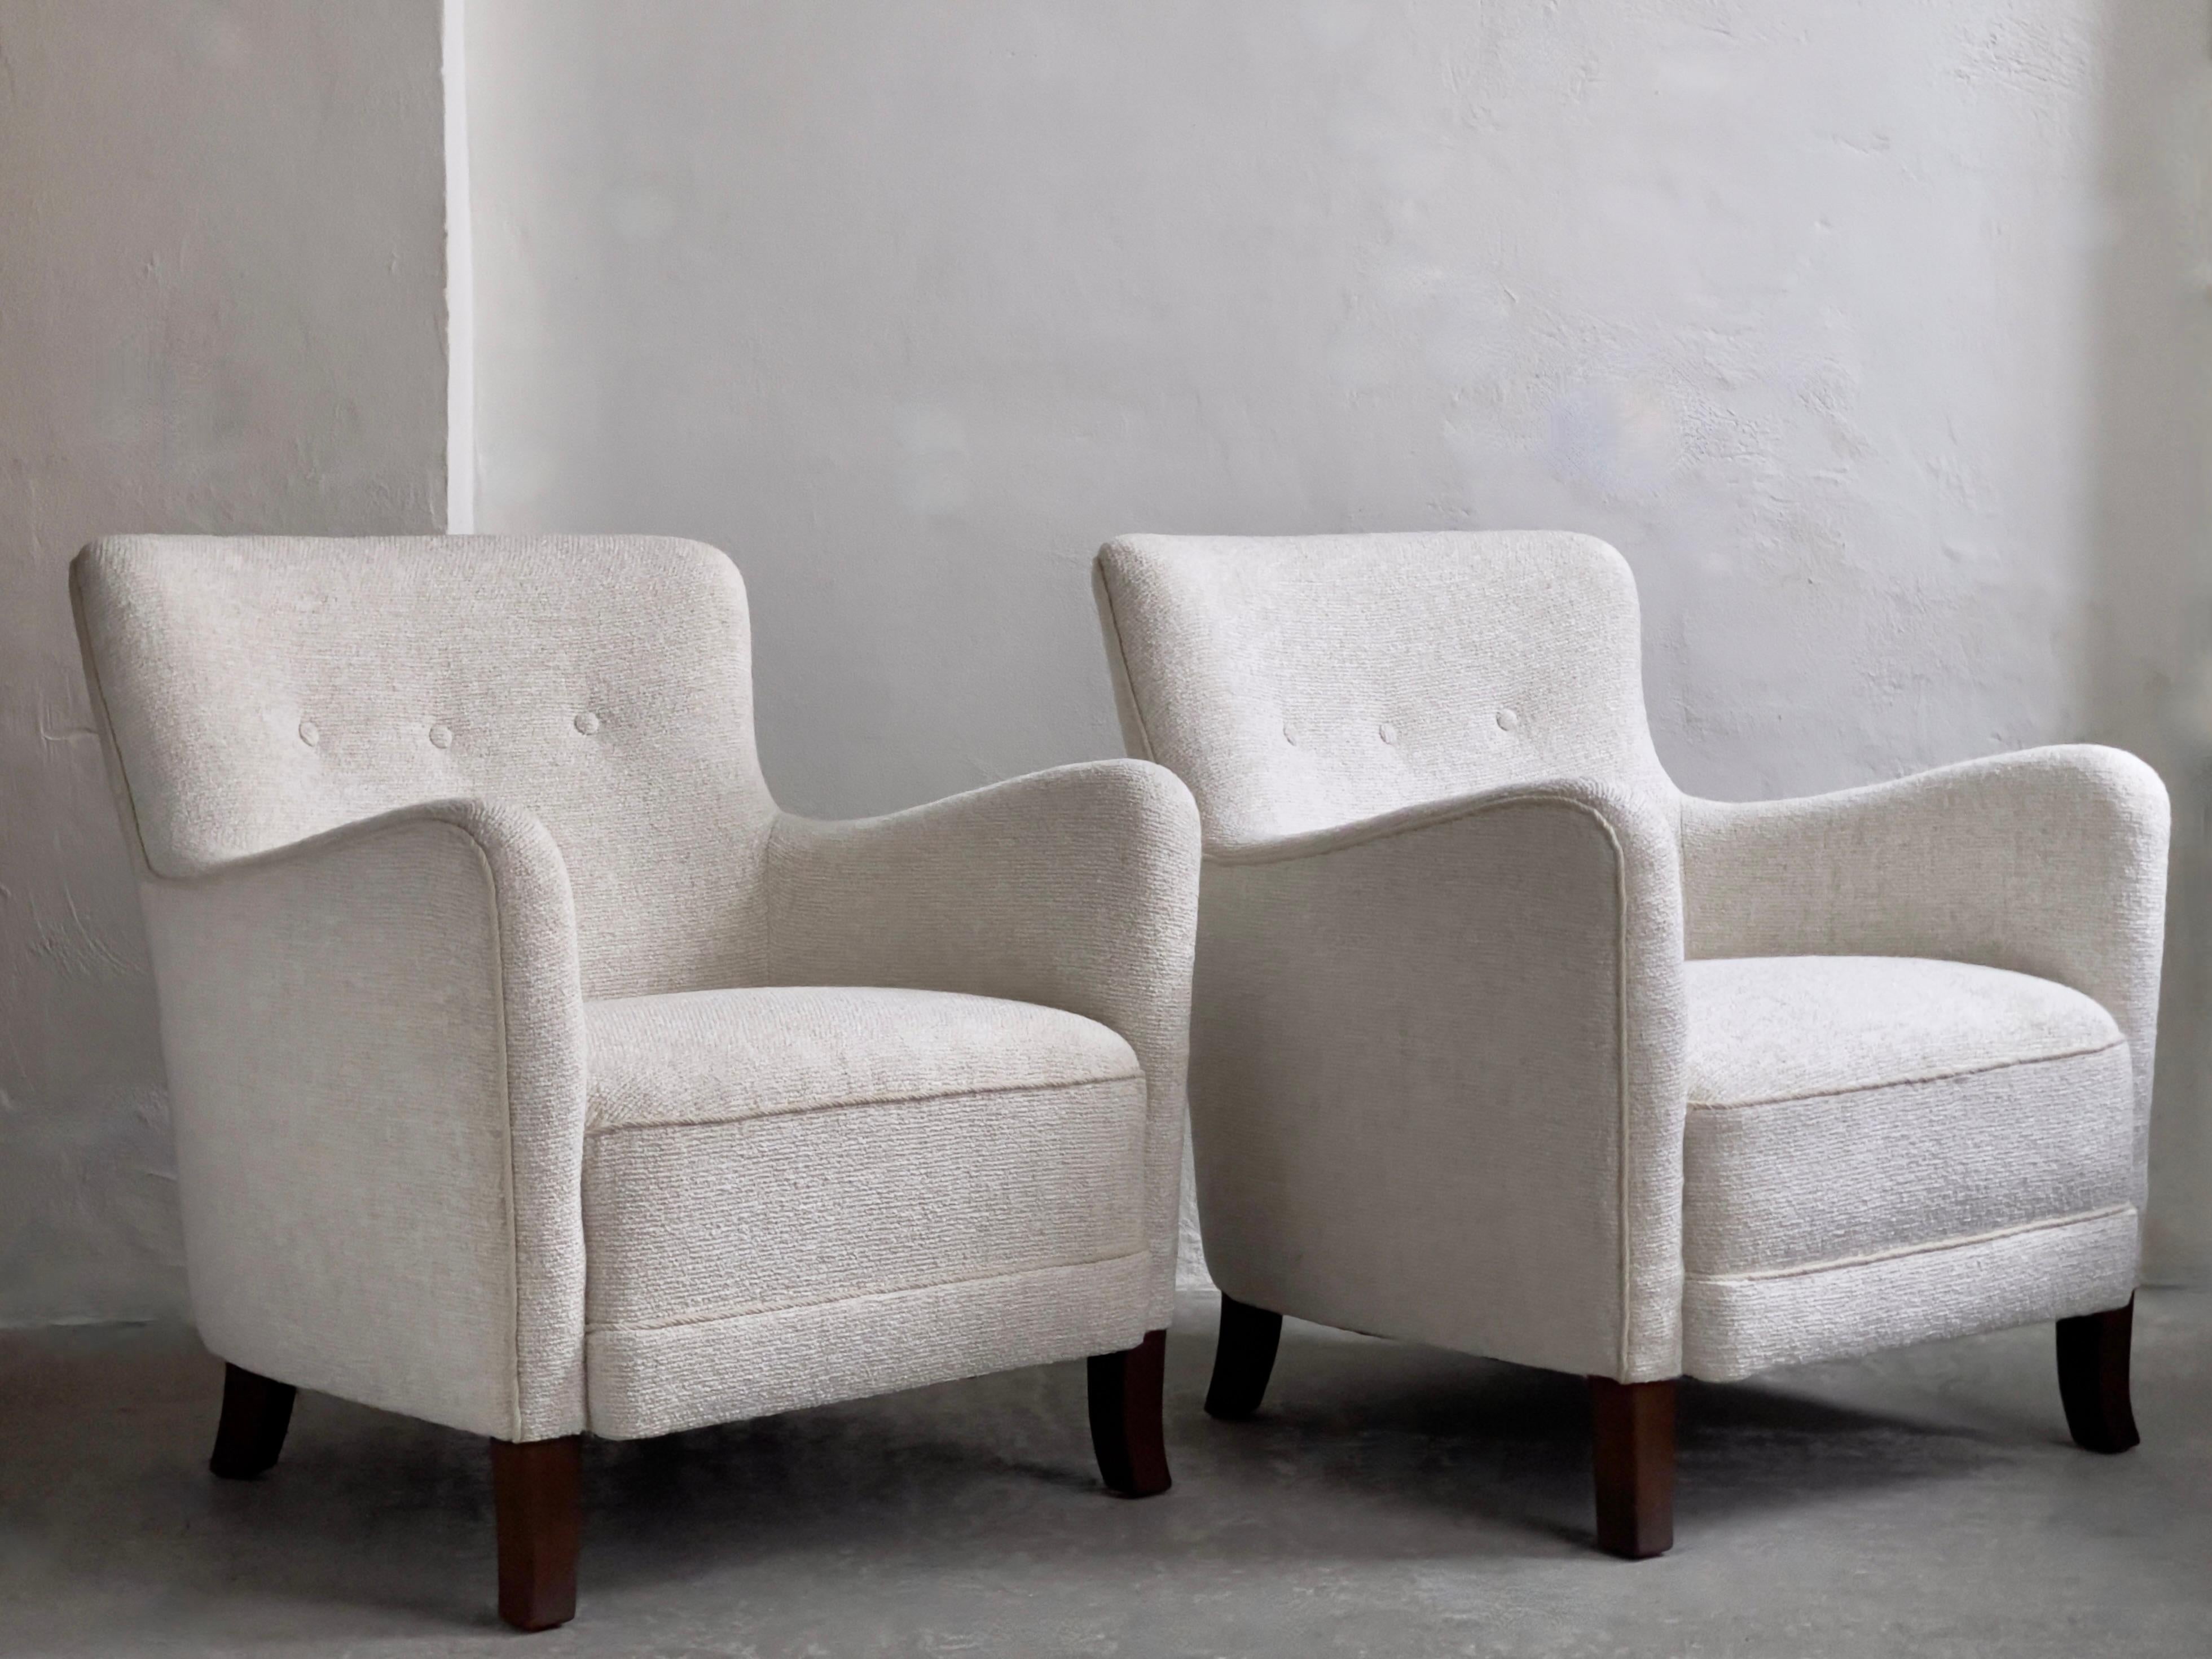 Very solid Pair of Fully Restored and reupholstered 1930s Danish Cabinetmaker Lounge Chairs with contemporary Sacho/Kvadrat fabric designed by Vincent van Duysen and Anna Vilhelmine Ebbesen's .

In the annals of mid-20th-century Danish design, these